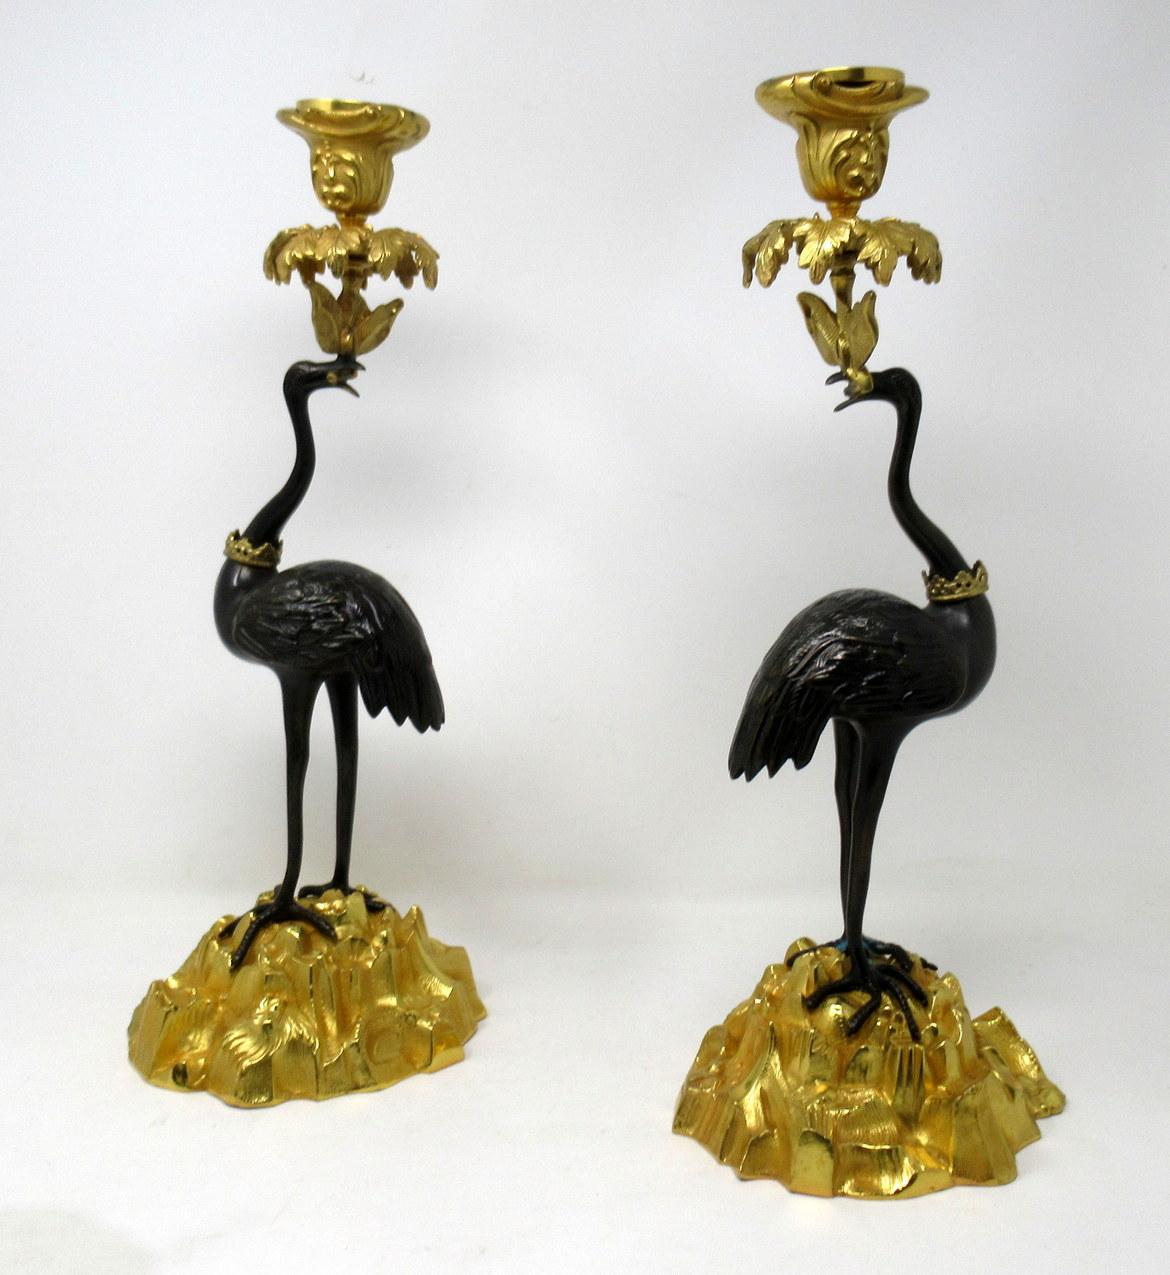 Stunning pair of English ormolu and patinated bronze single light candlesticks of good size proportions modelled as a pair of storks, signed Abbott, circa 1840.

Each exquisitely modelled as standing storks or cranes perched on a gilt naturalistic